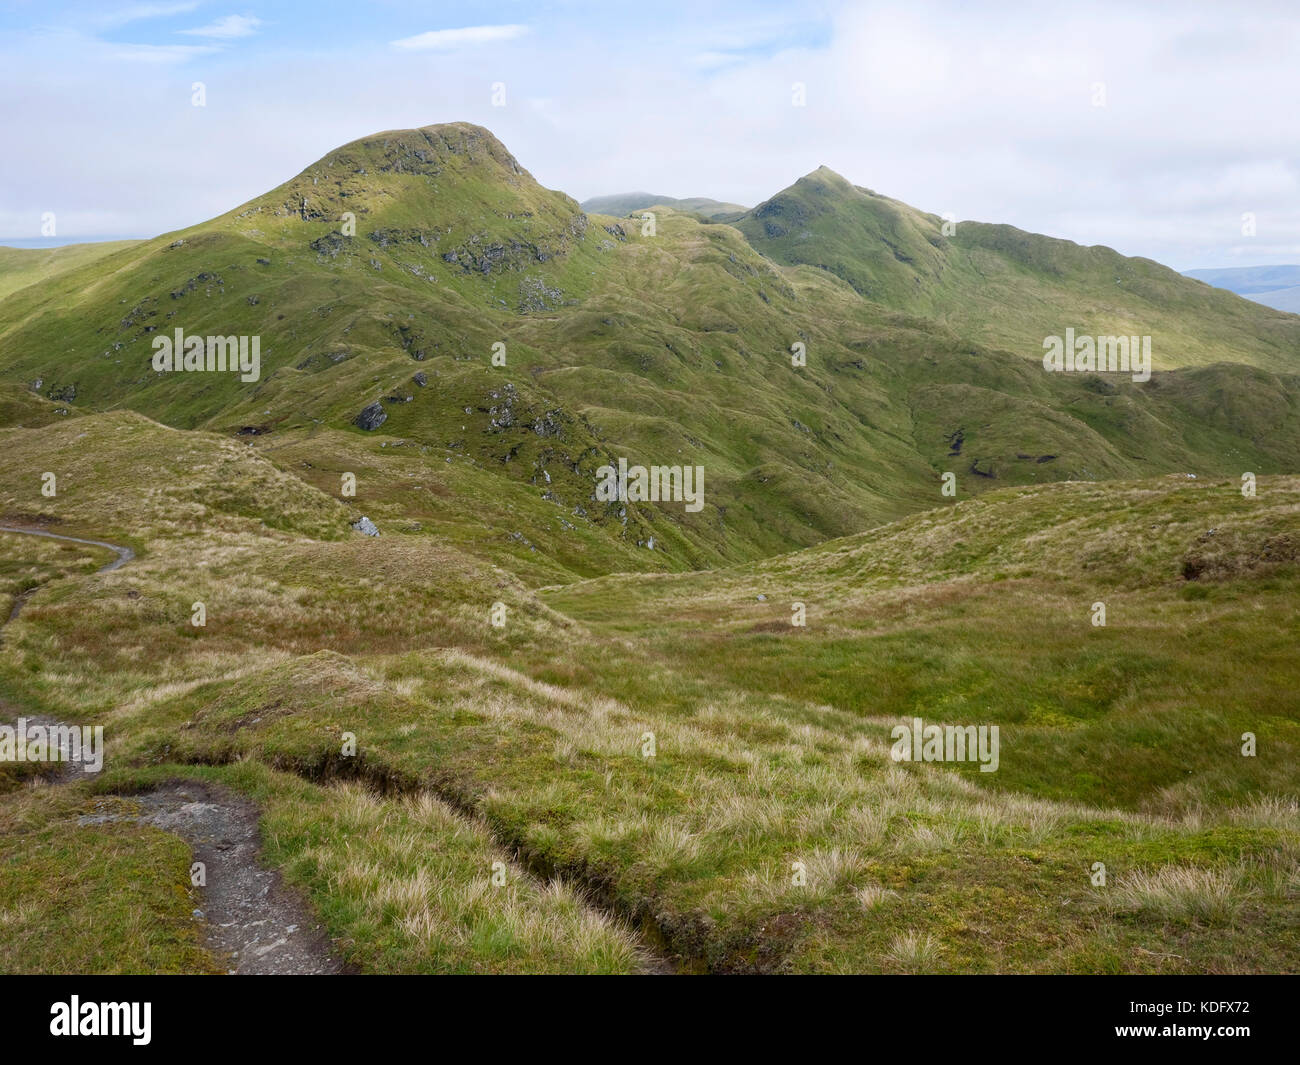 The peaks of Beinn nan Eachan (L) and Meall Garbh (R) viewed from Creag na Caillich on Scotland's Tarmachan Ridge Stock Photo